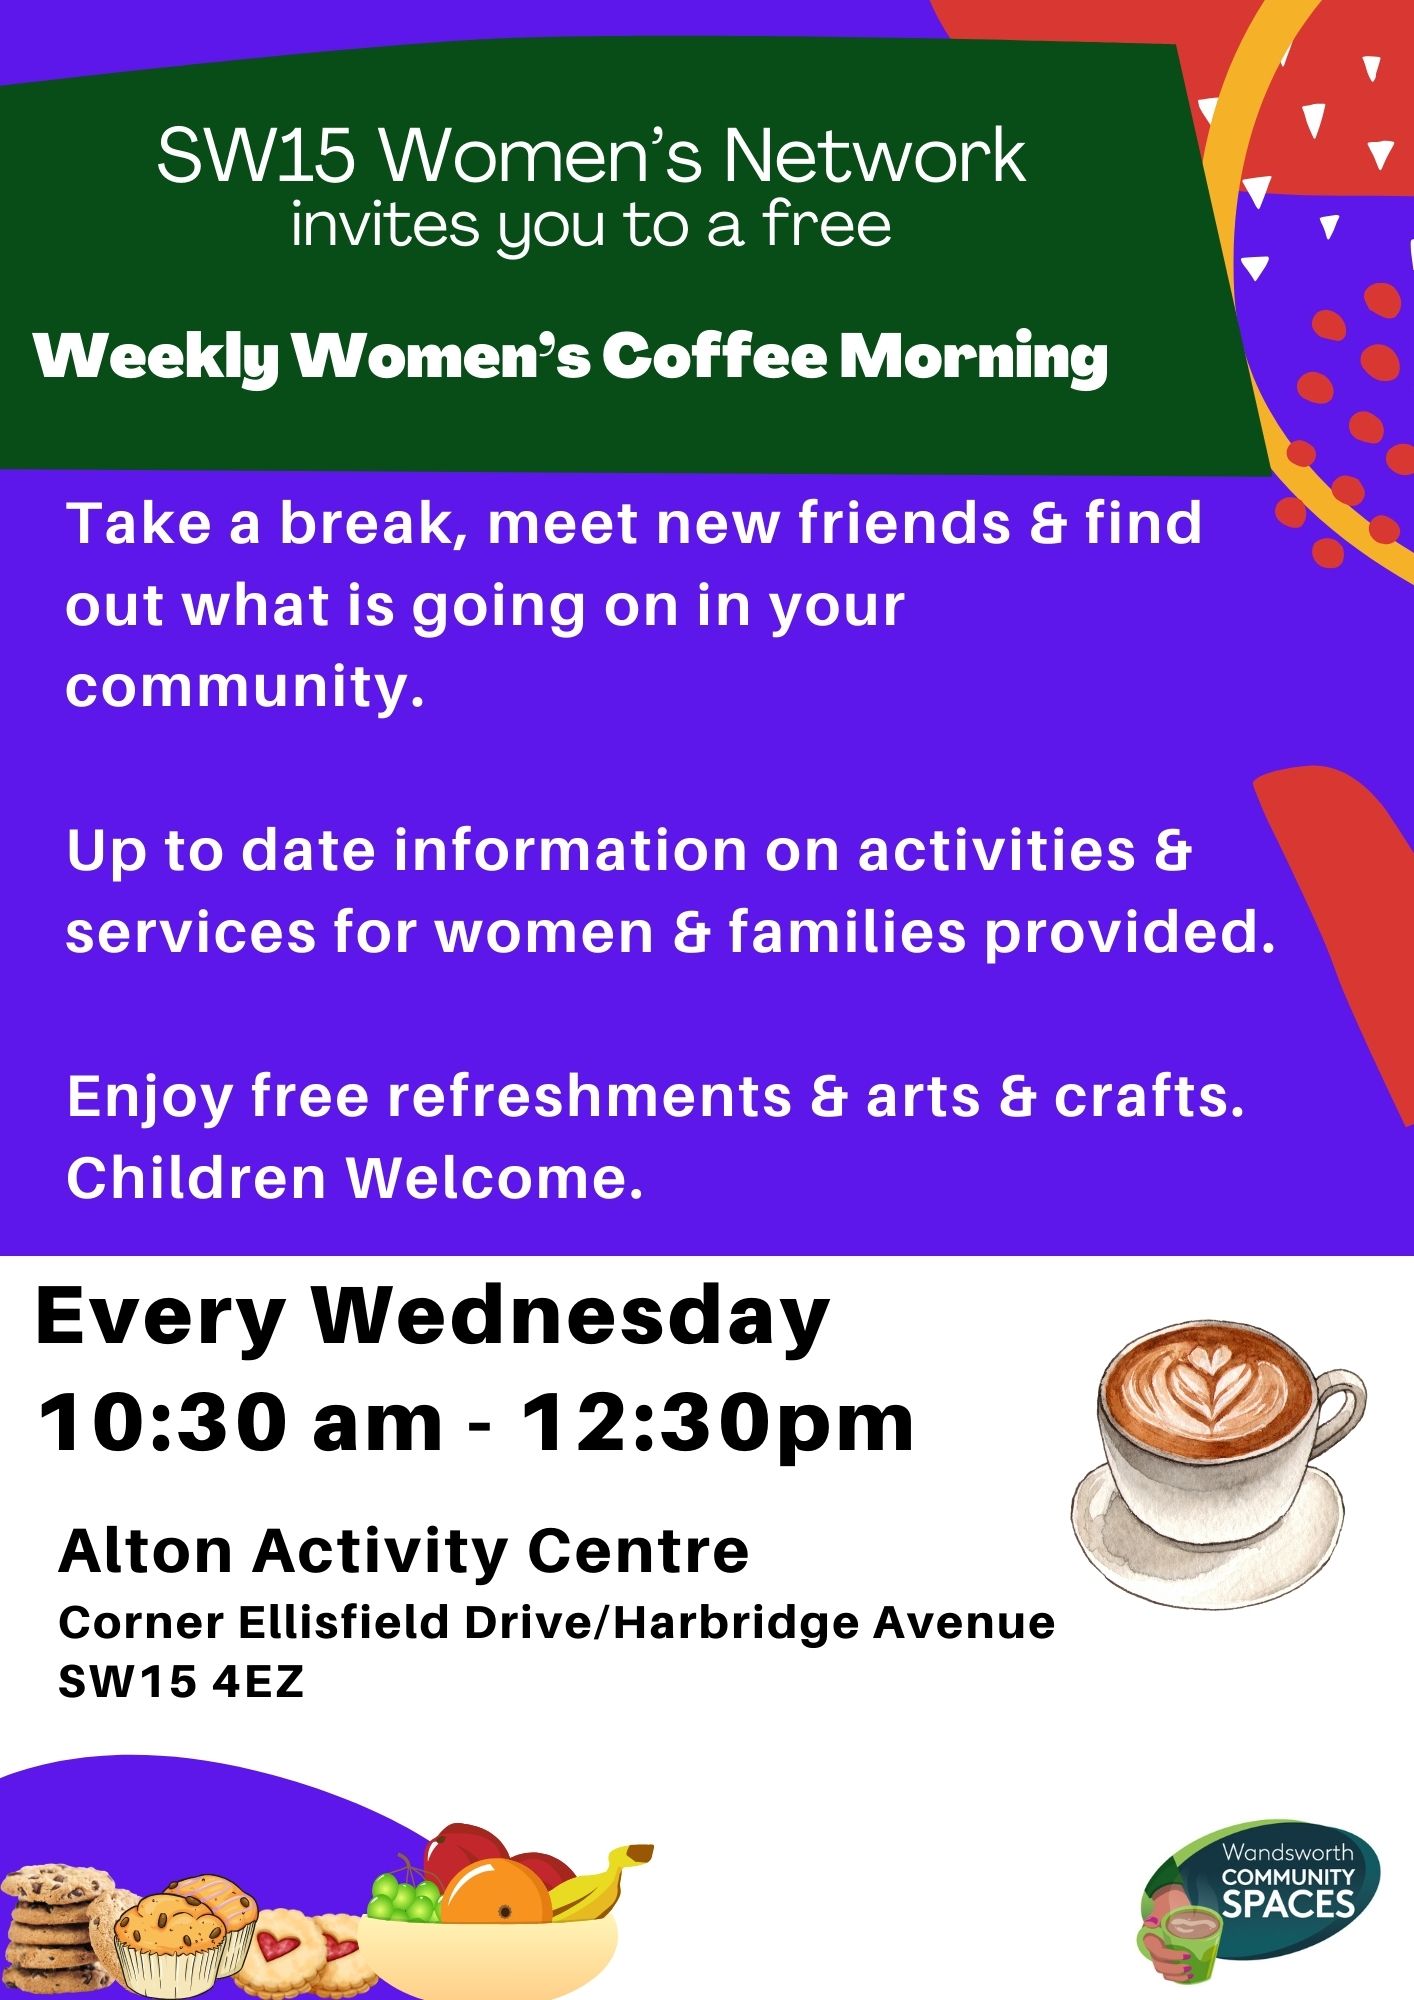 Poster advertising weekly women's coffee morning which takes place every Wednesday from 10.30am in the Alton Activity Centre